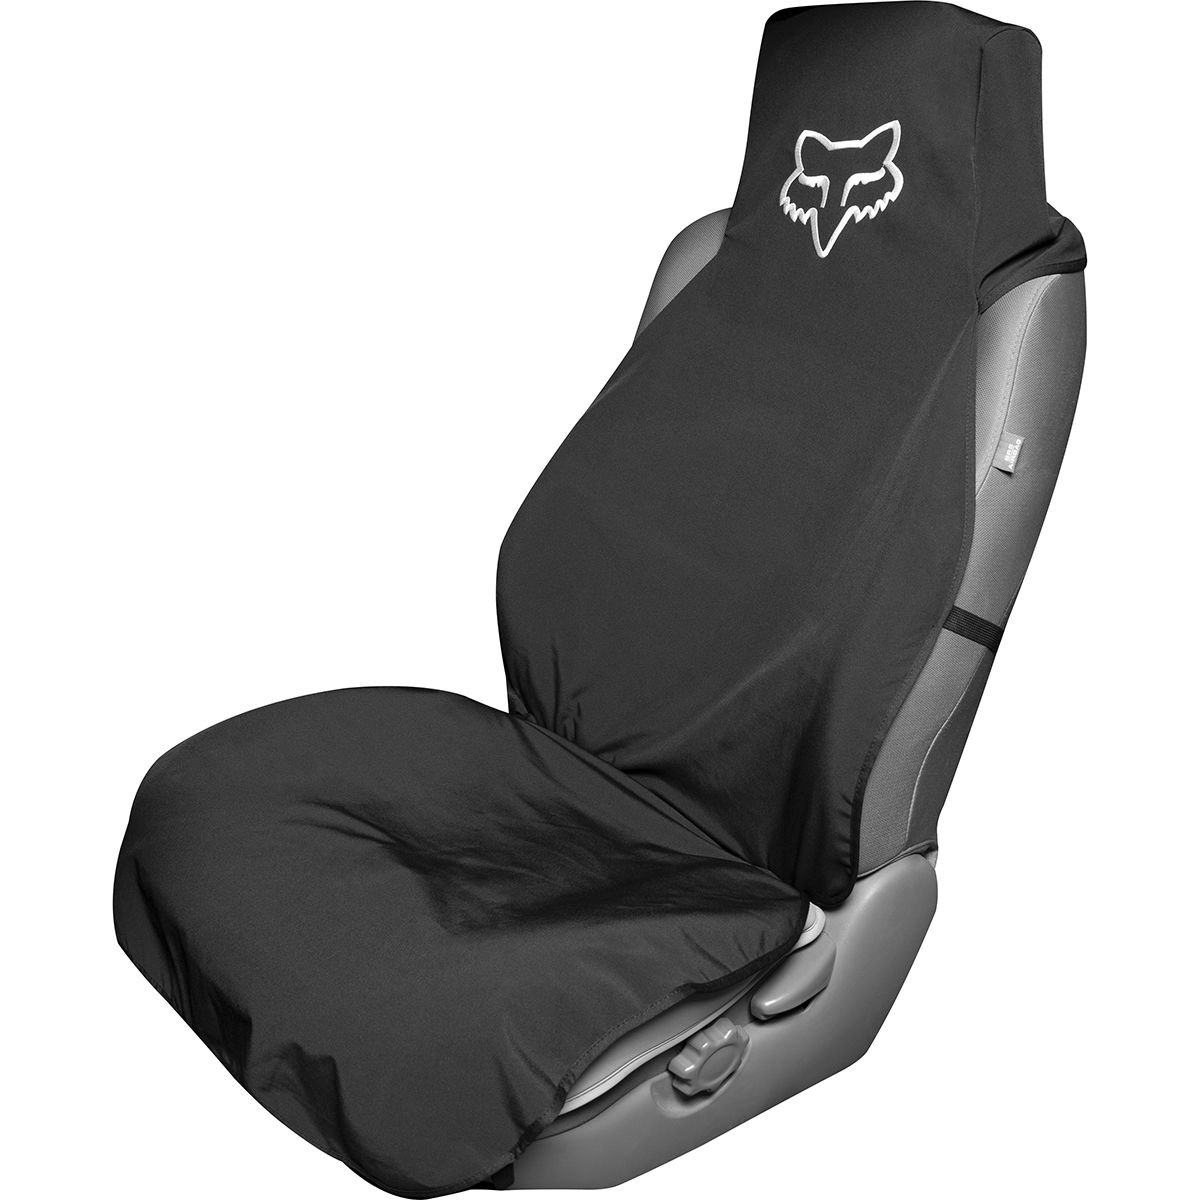 Fox Racing Seat Cover Black, One Size